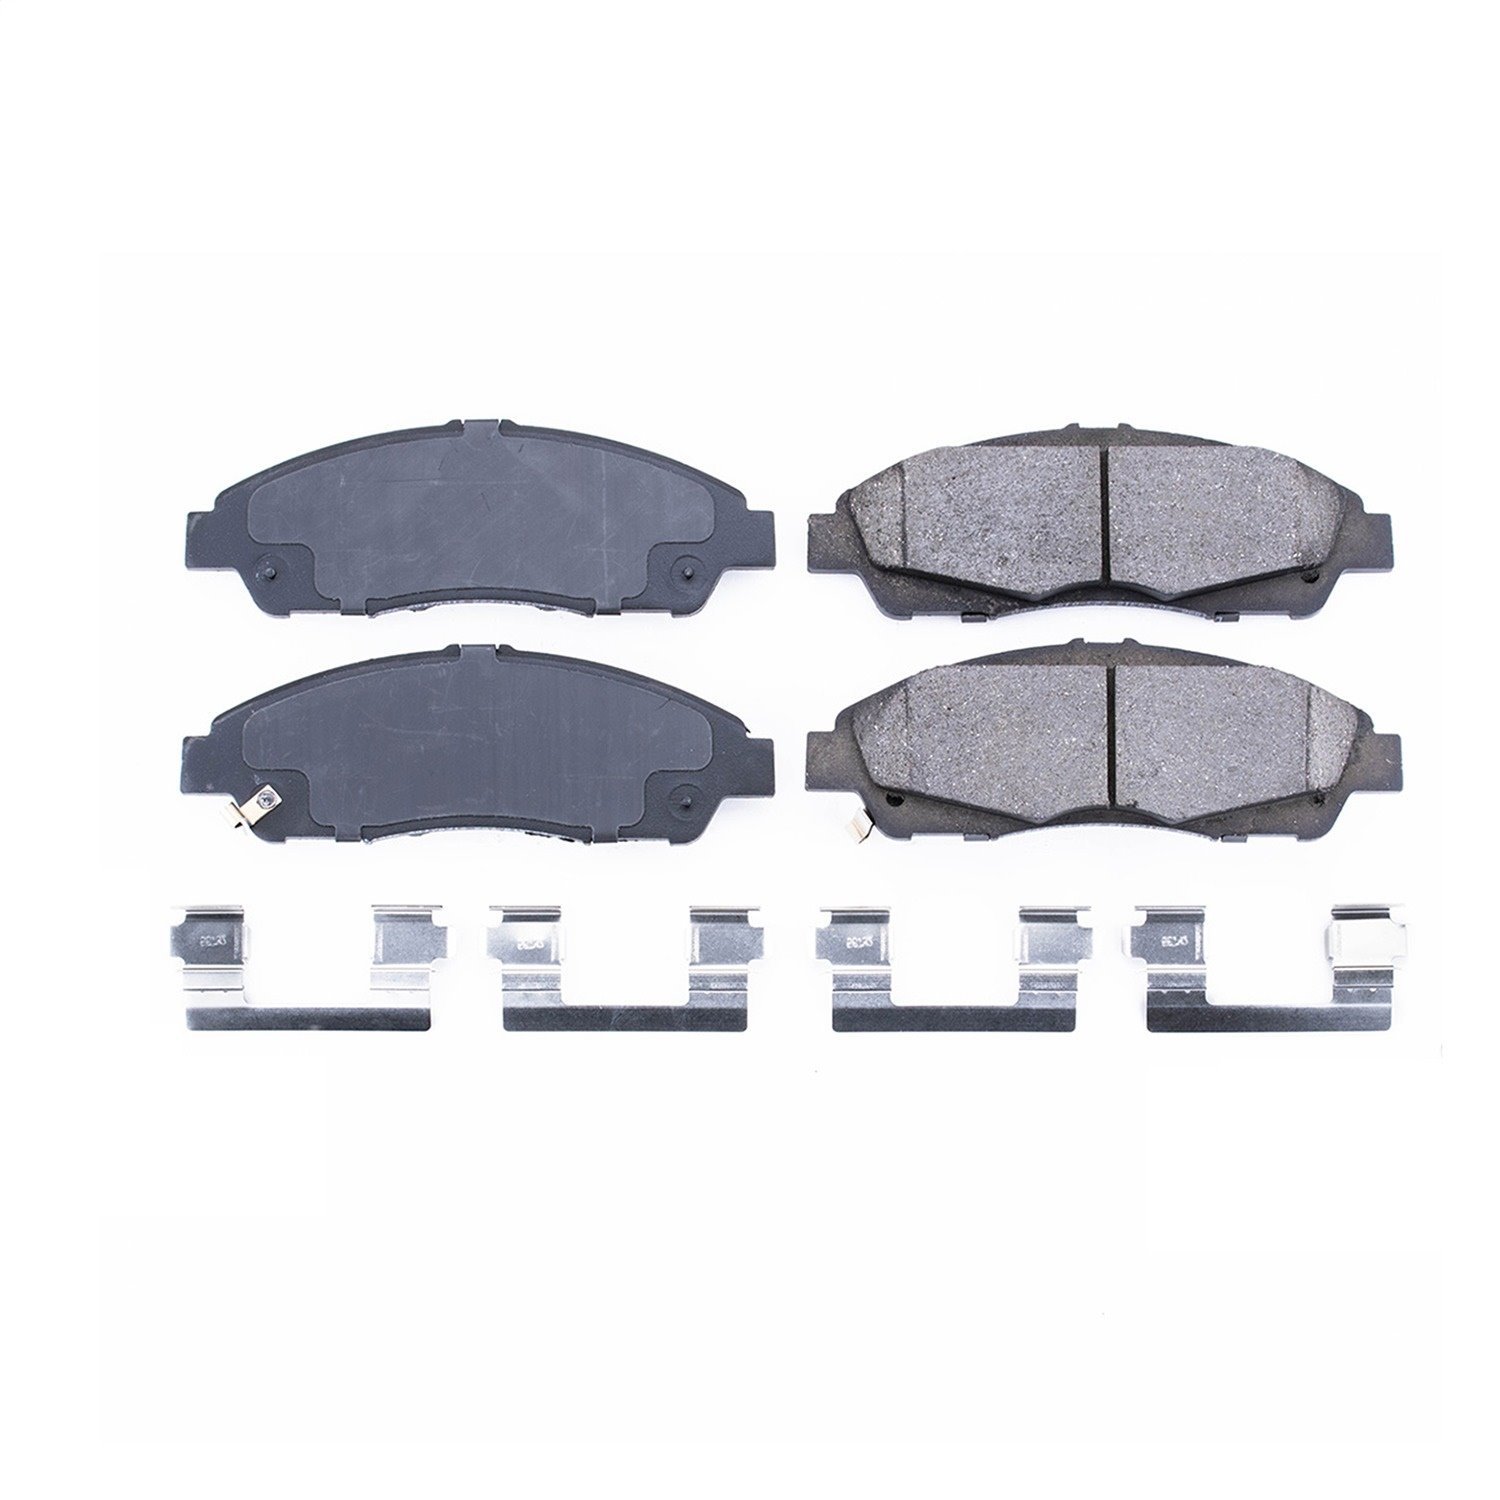 Z17 Evolution Plus Ceramic Front Brake Pads Fits Select 2017-2020 Buick, Cadillac, Chevrolet, GMC Models